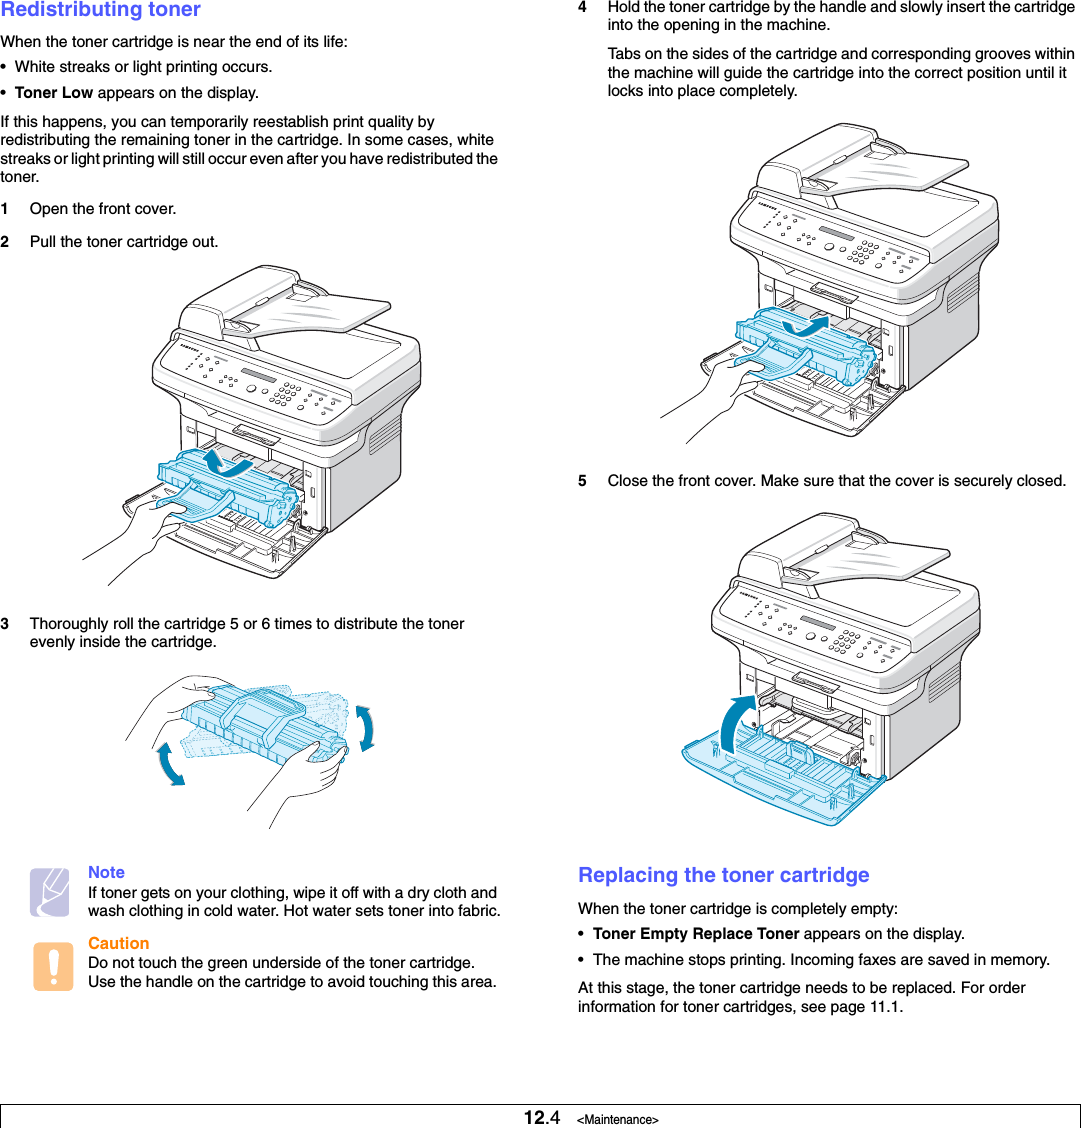 12.4   &lt;Maintenance&gt;Redistributing tonerWhen the toner cartridge is near the end of its life:• White streaks or light printing occurs. •Toner Low appears on the display.If this happens, you can temporarily reestablish print quality by redistributing the remaining toner in the cartridge. In some cases, white streaks or light printing will still occur even after you have redistributed the toner.1Open the front cover.2Pull the toner cartridge out.3Thoroughly roll the cartridge 5 or 6 times to distribute the toner evenly inside the cartridge.NoteIf toner gets on your clothing, wipe it off with a dry cloth and wash clothing in cold water. Hot water sets toner into fabric.CautionDo not touch the green underside of the toner cartridge. Use the handle on the cartridge to avoid touching this area. 4Hold the toner cartridge by the handle and slowly insert the cartridge into the opening in the machine. Tabs on the sides of the cartridge and corresponding grooves within the machine will guide the cartridge into the correct position until it locks into place completely.5Close the front cover. Make sure that the cover is securely closed.Replacing the toner cartridgeWhen the toner cartridge is completely empty:•Toner Empty Replace Toner appears on the display. • The machine stops printing. Incoming faxes are saved in memory. At this stage, the toner cartridge needs to be replaced. For order information for toner cartridges, see page 11.1.